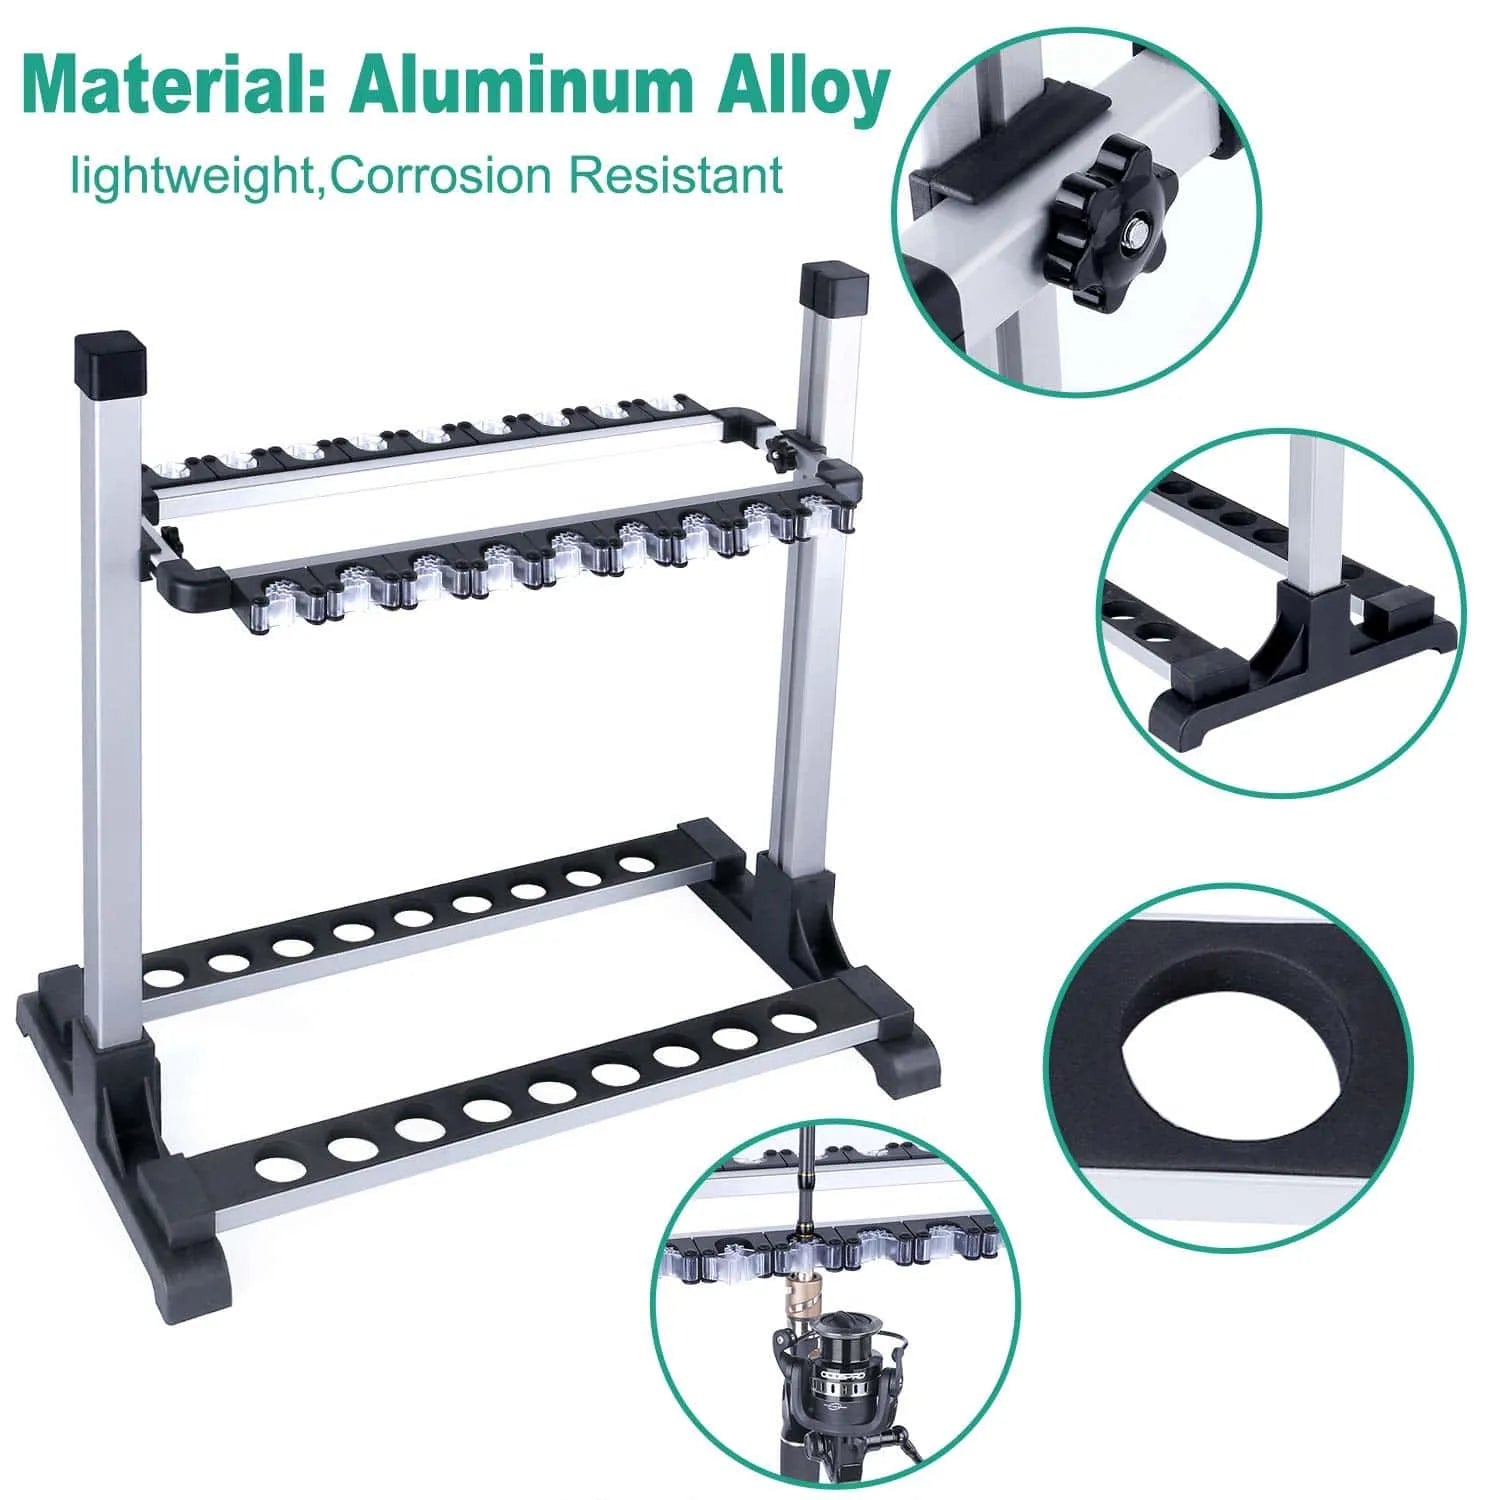 One Bass Fishing Rod Rack Metal Aluminum Alloy Portable Fishing Rod Holder  Fishing Rod Organizer for All Type Fishing Pole, Hold Up to 24 Rods